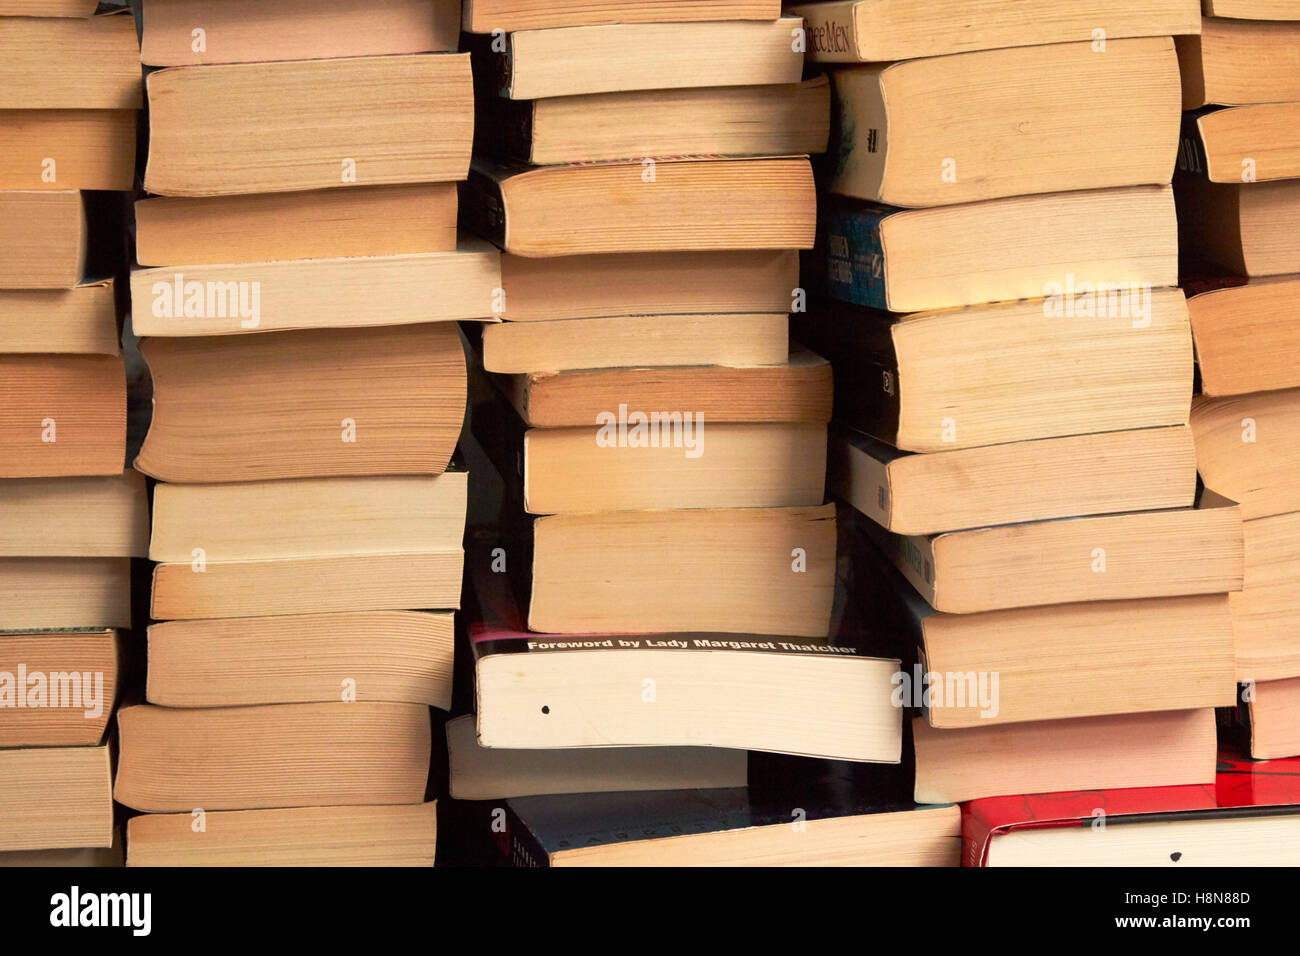 pile of stacks of used paperback books in the uk Stock Photo